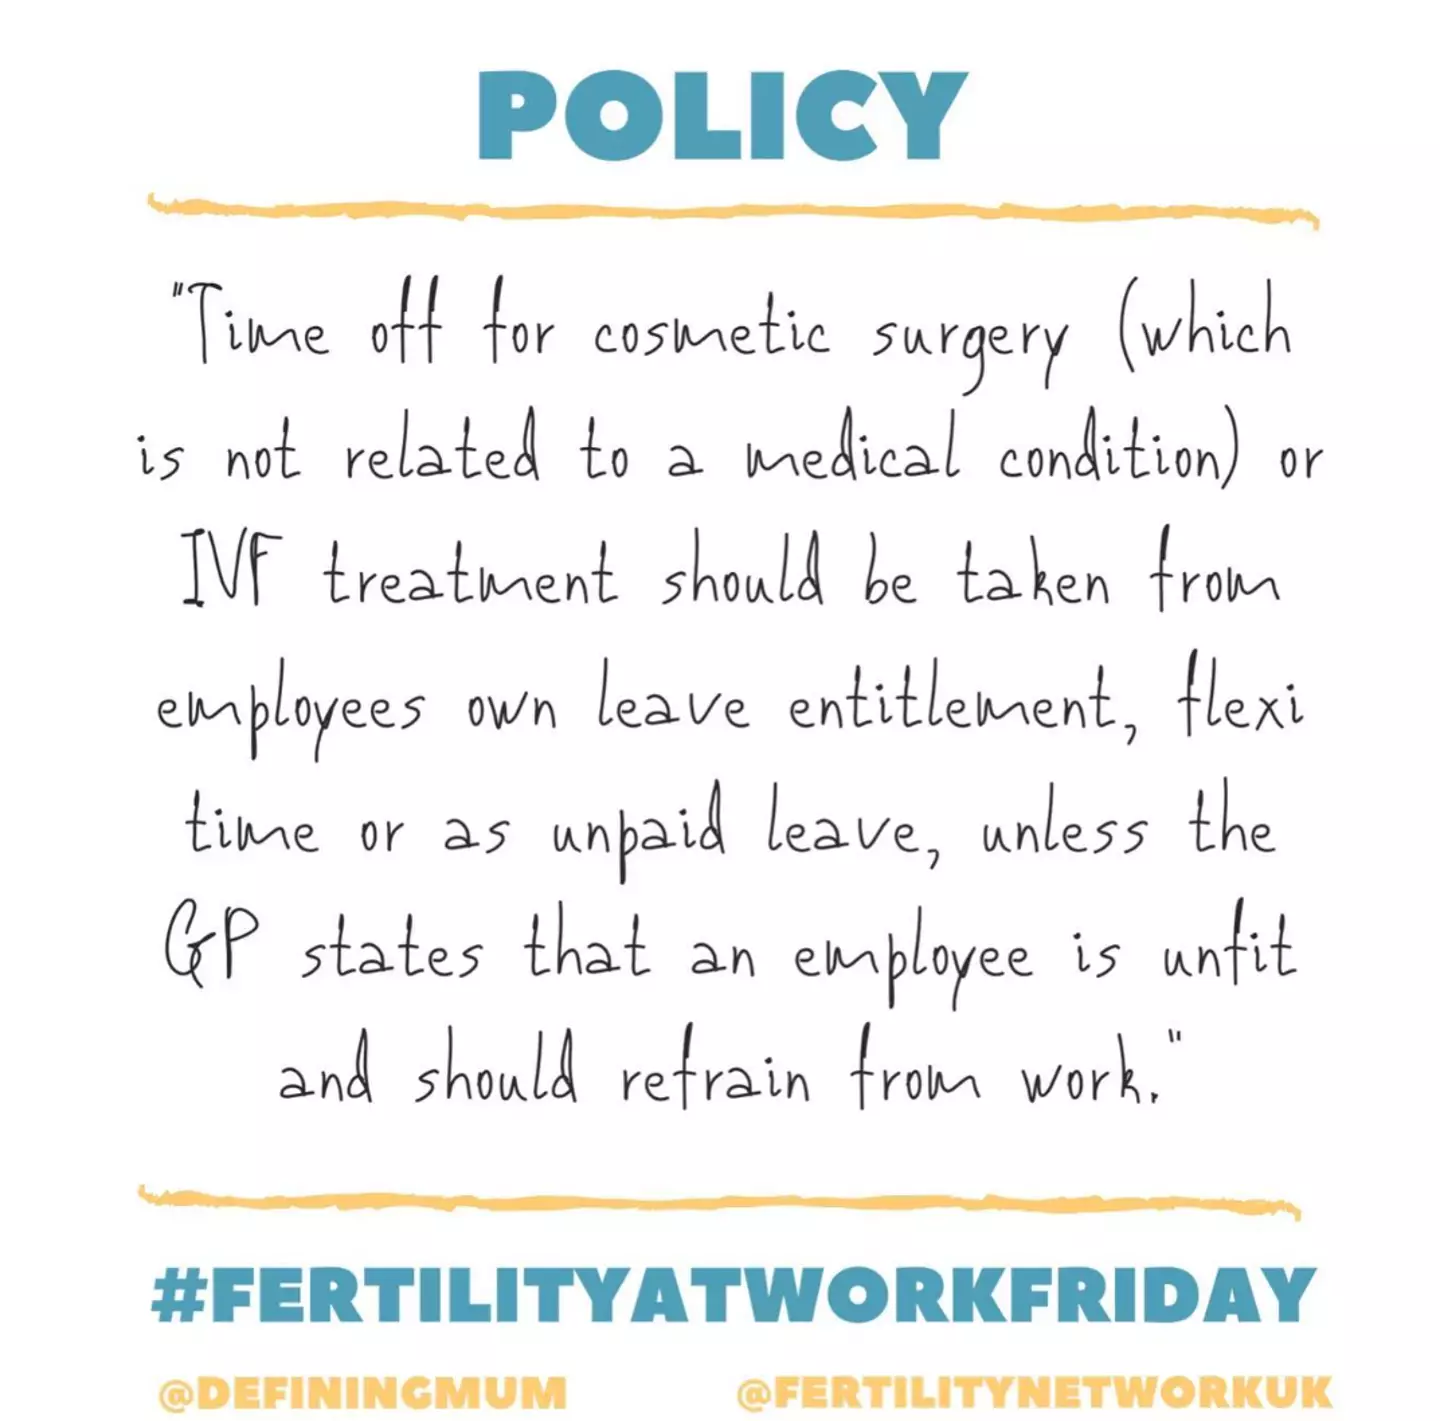 An example of a workplace's fertility policy.